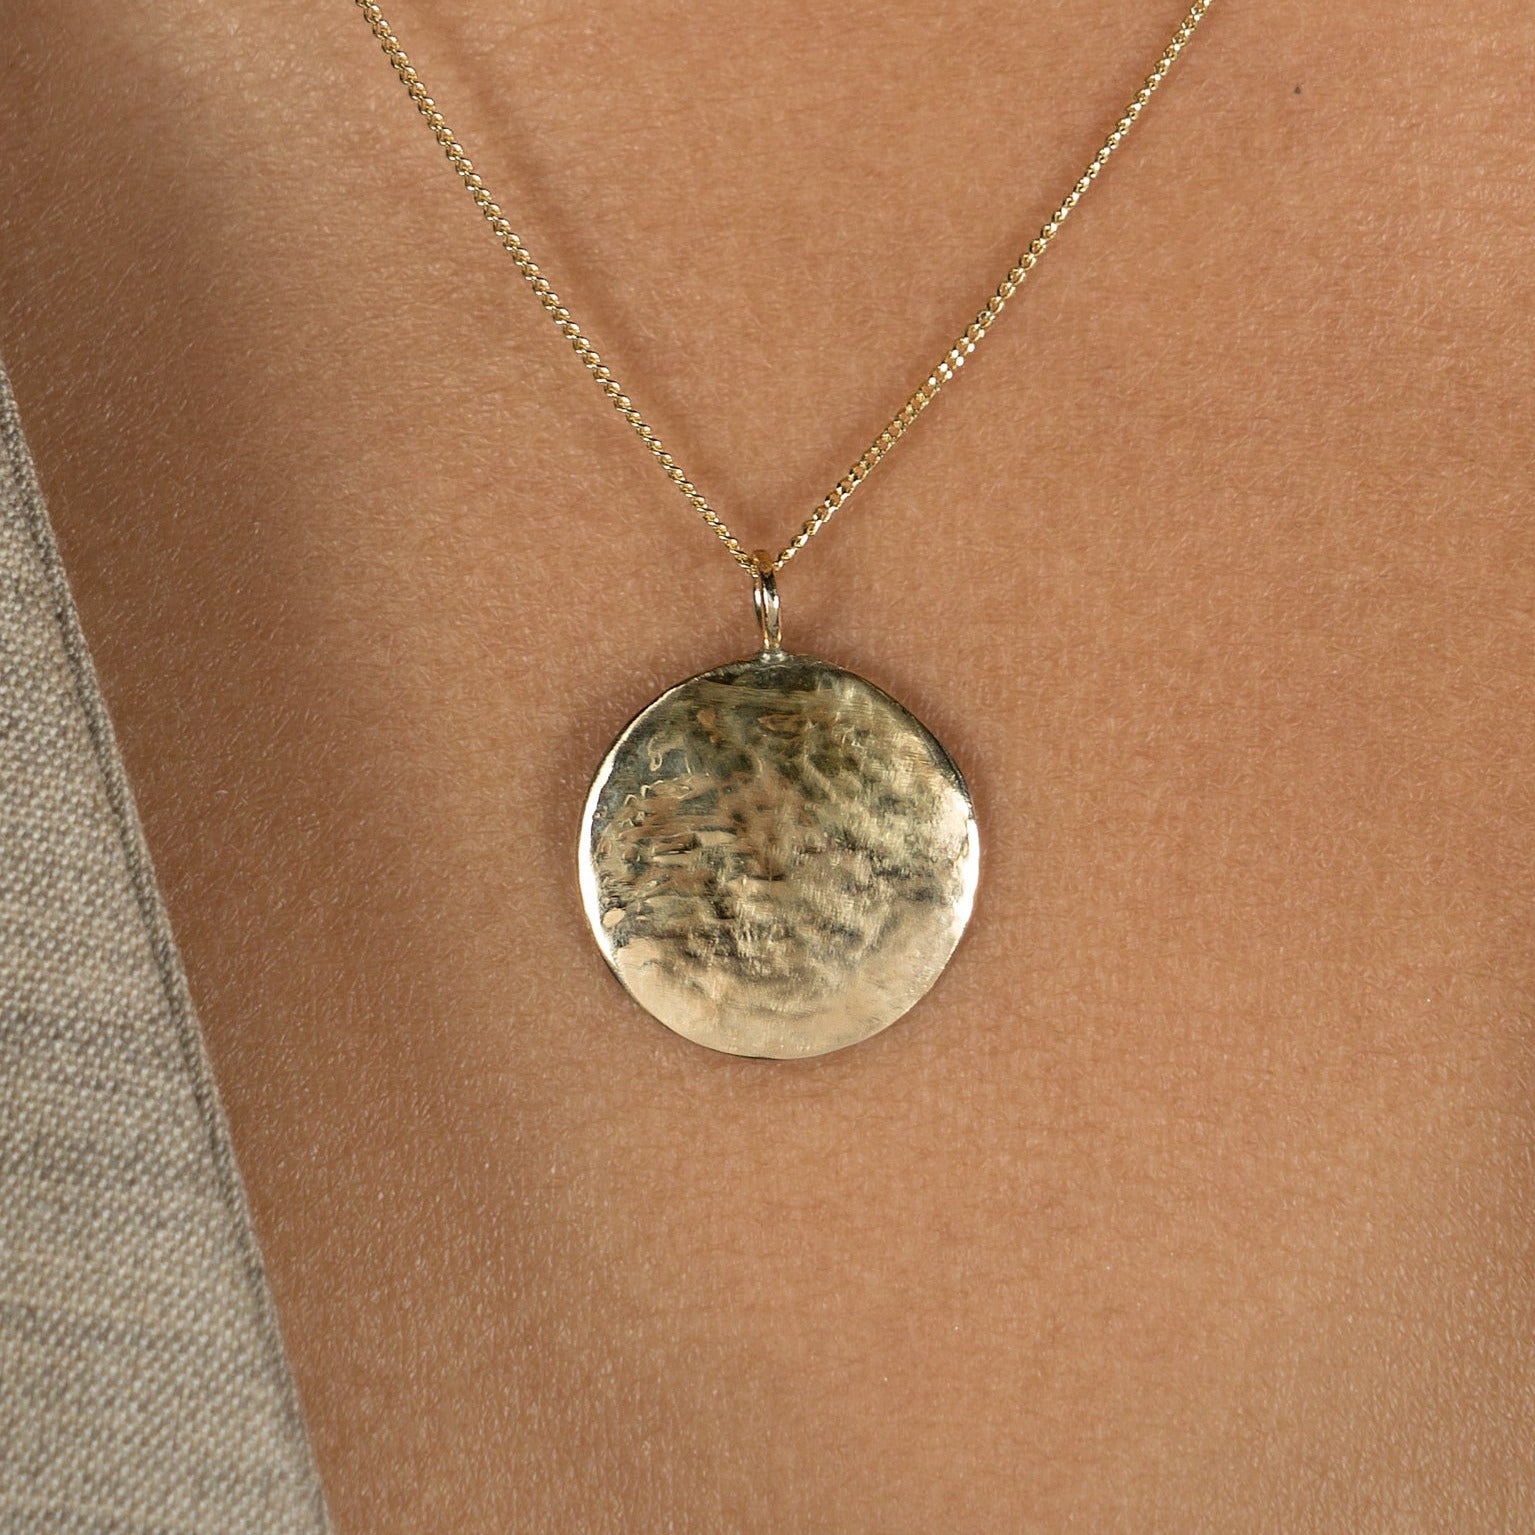 Silver Hammered Disc Necklace, Jewelry | FatFace.com